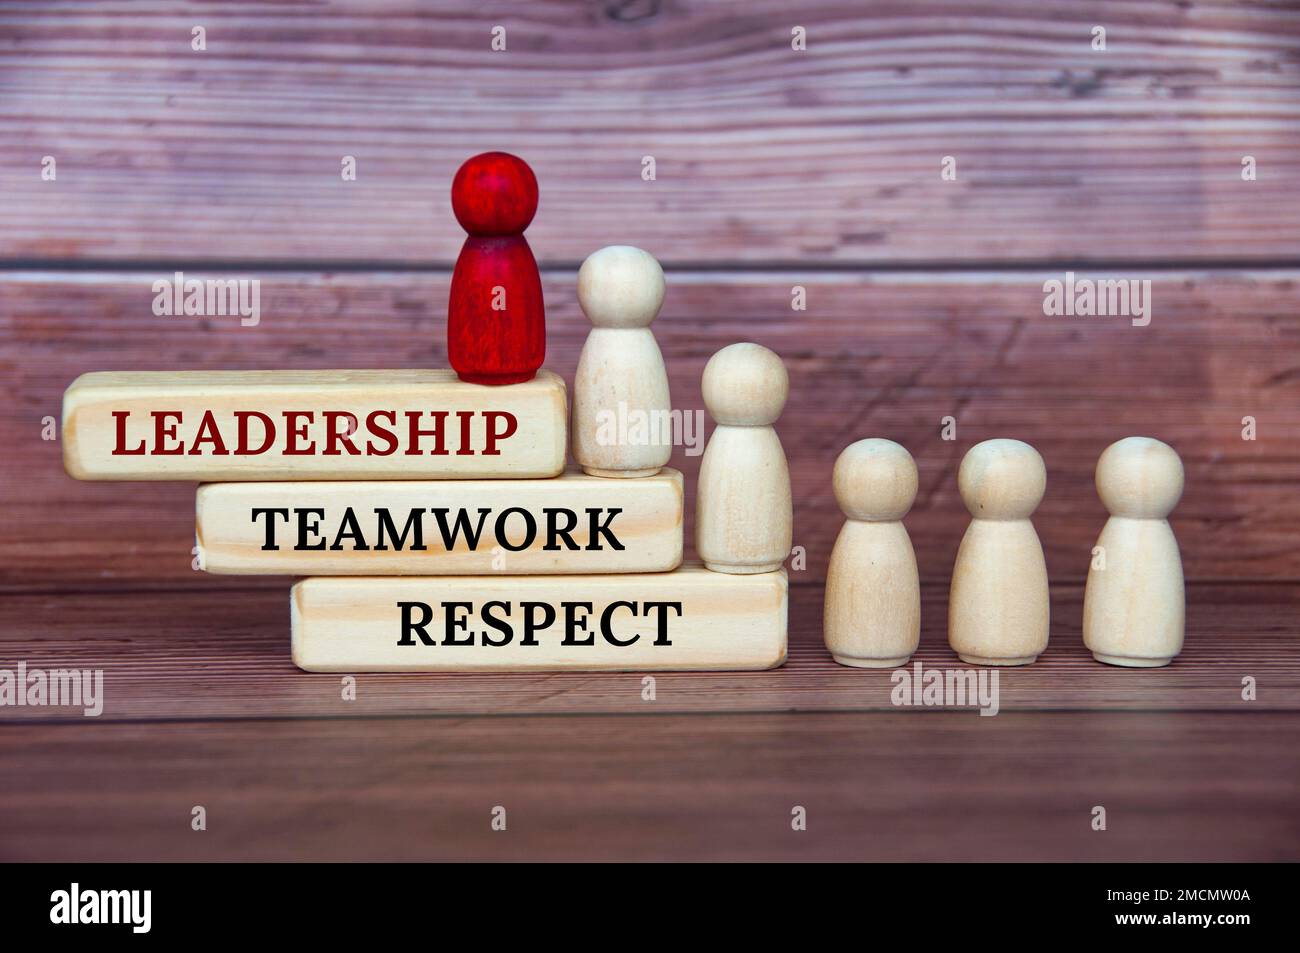 Leadership concept - Leadership, teamwork and respect text on wooden blocks with red and white doll figure on wooden cover background. Stock Photo